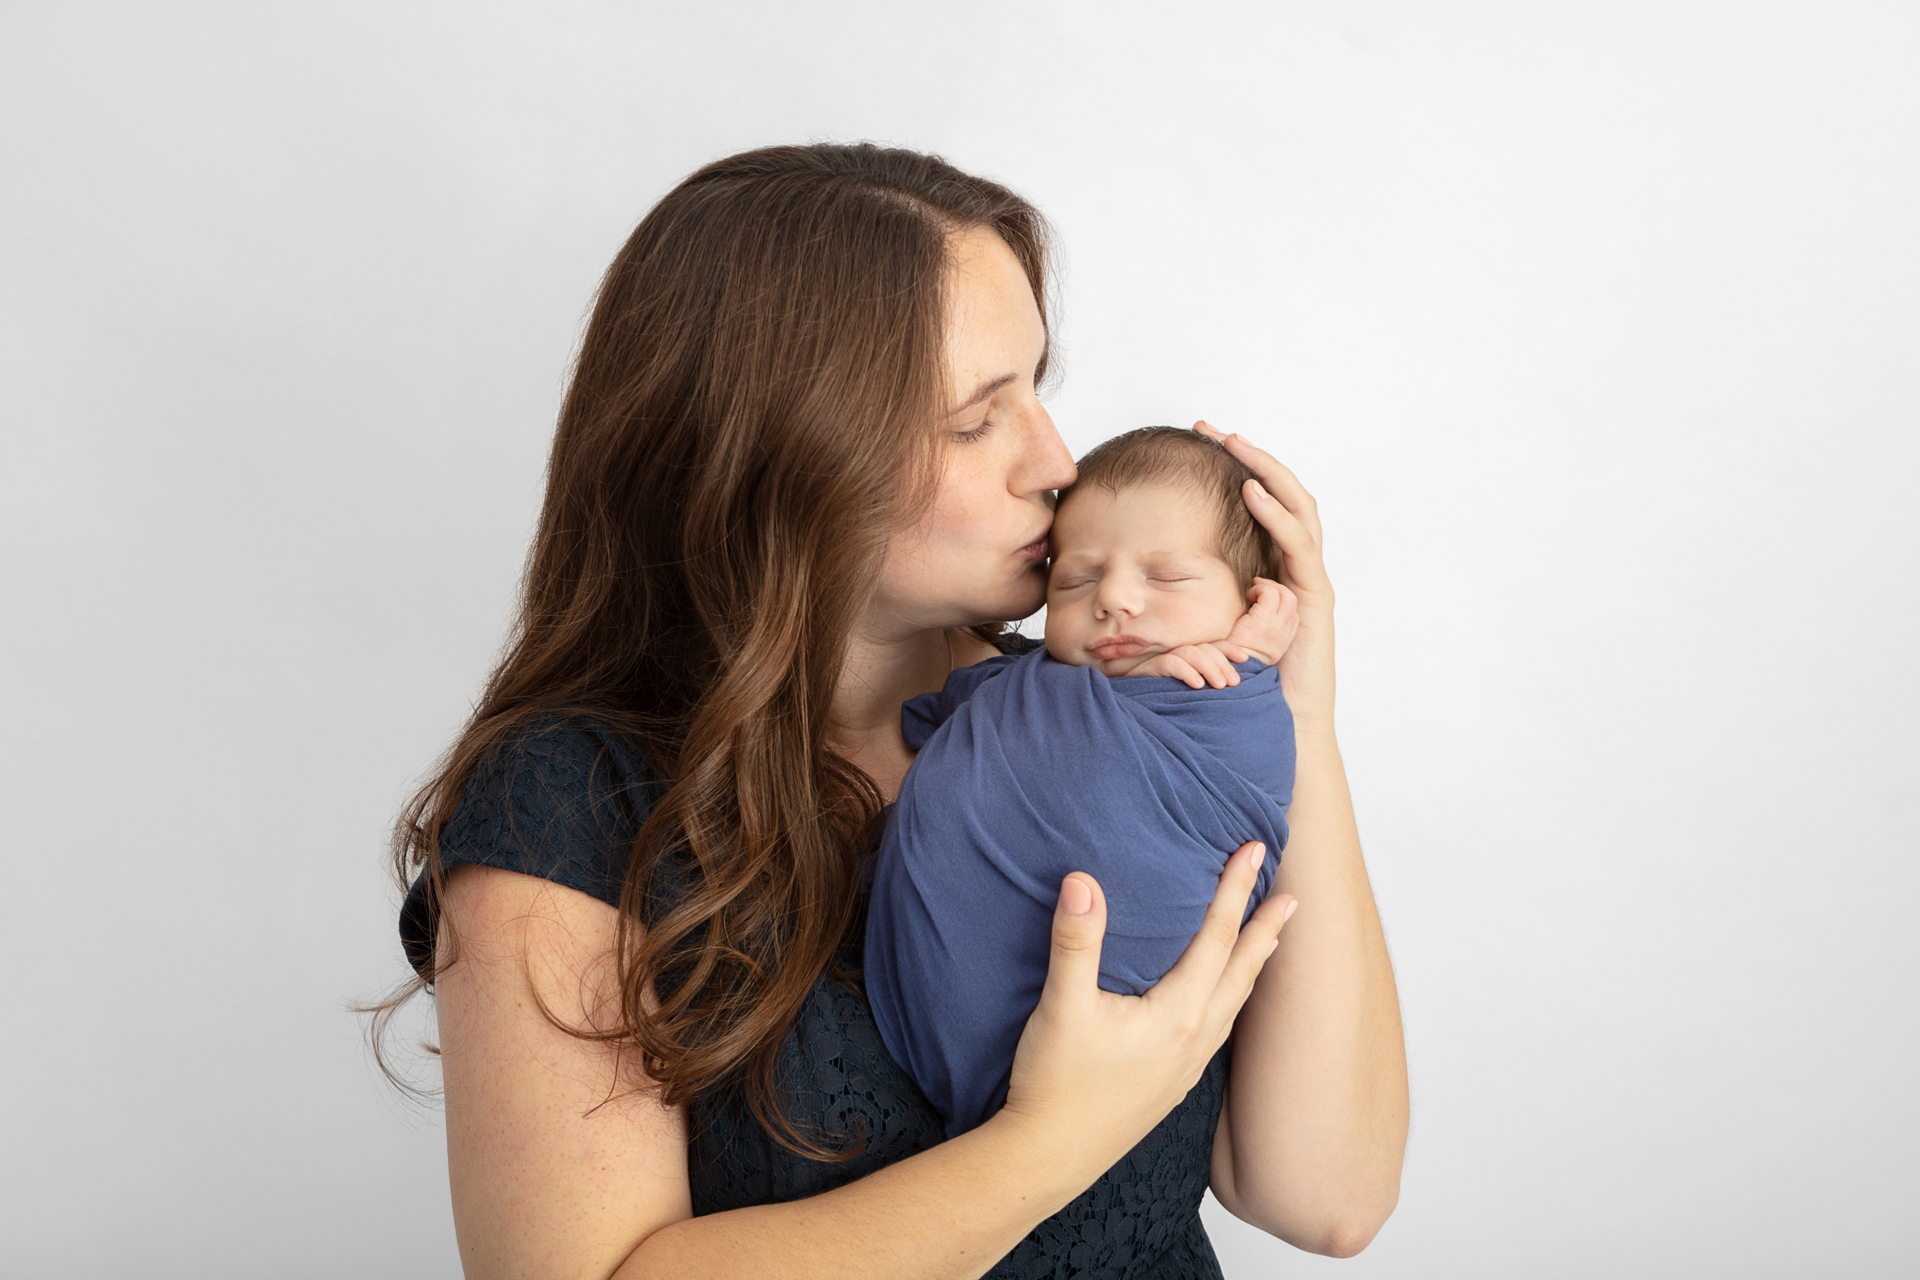 mom with long auburn hair wearing a navy top holding her newborn baby kissing them